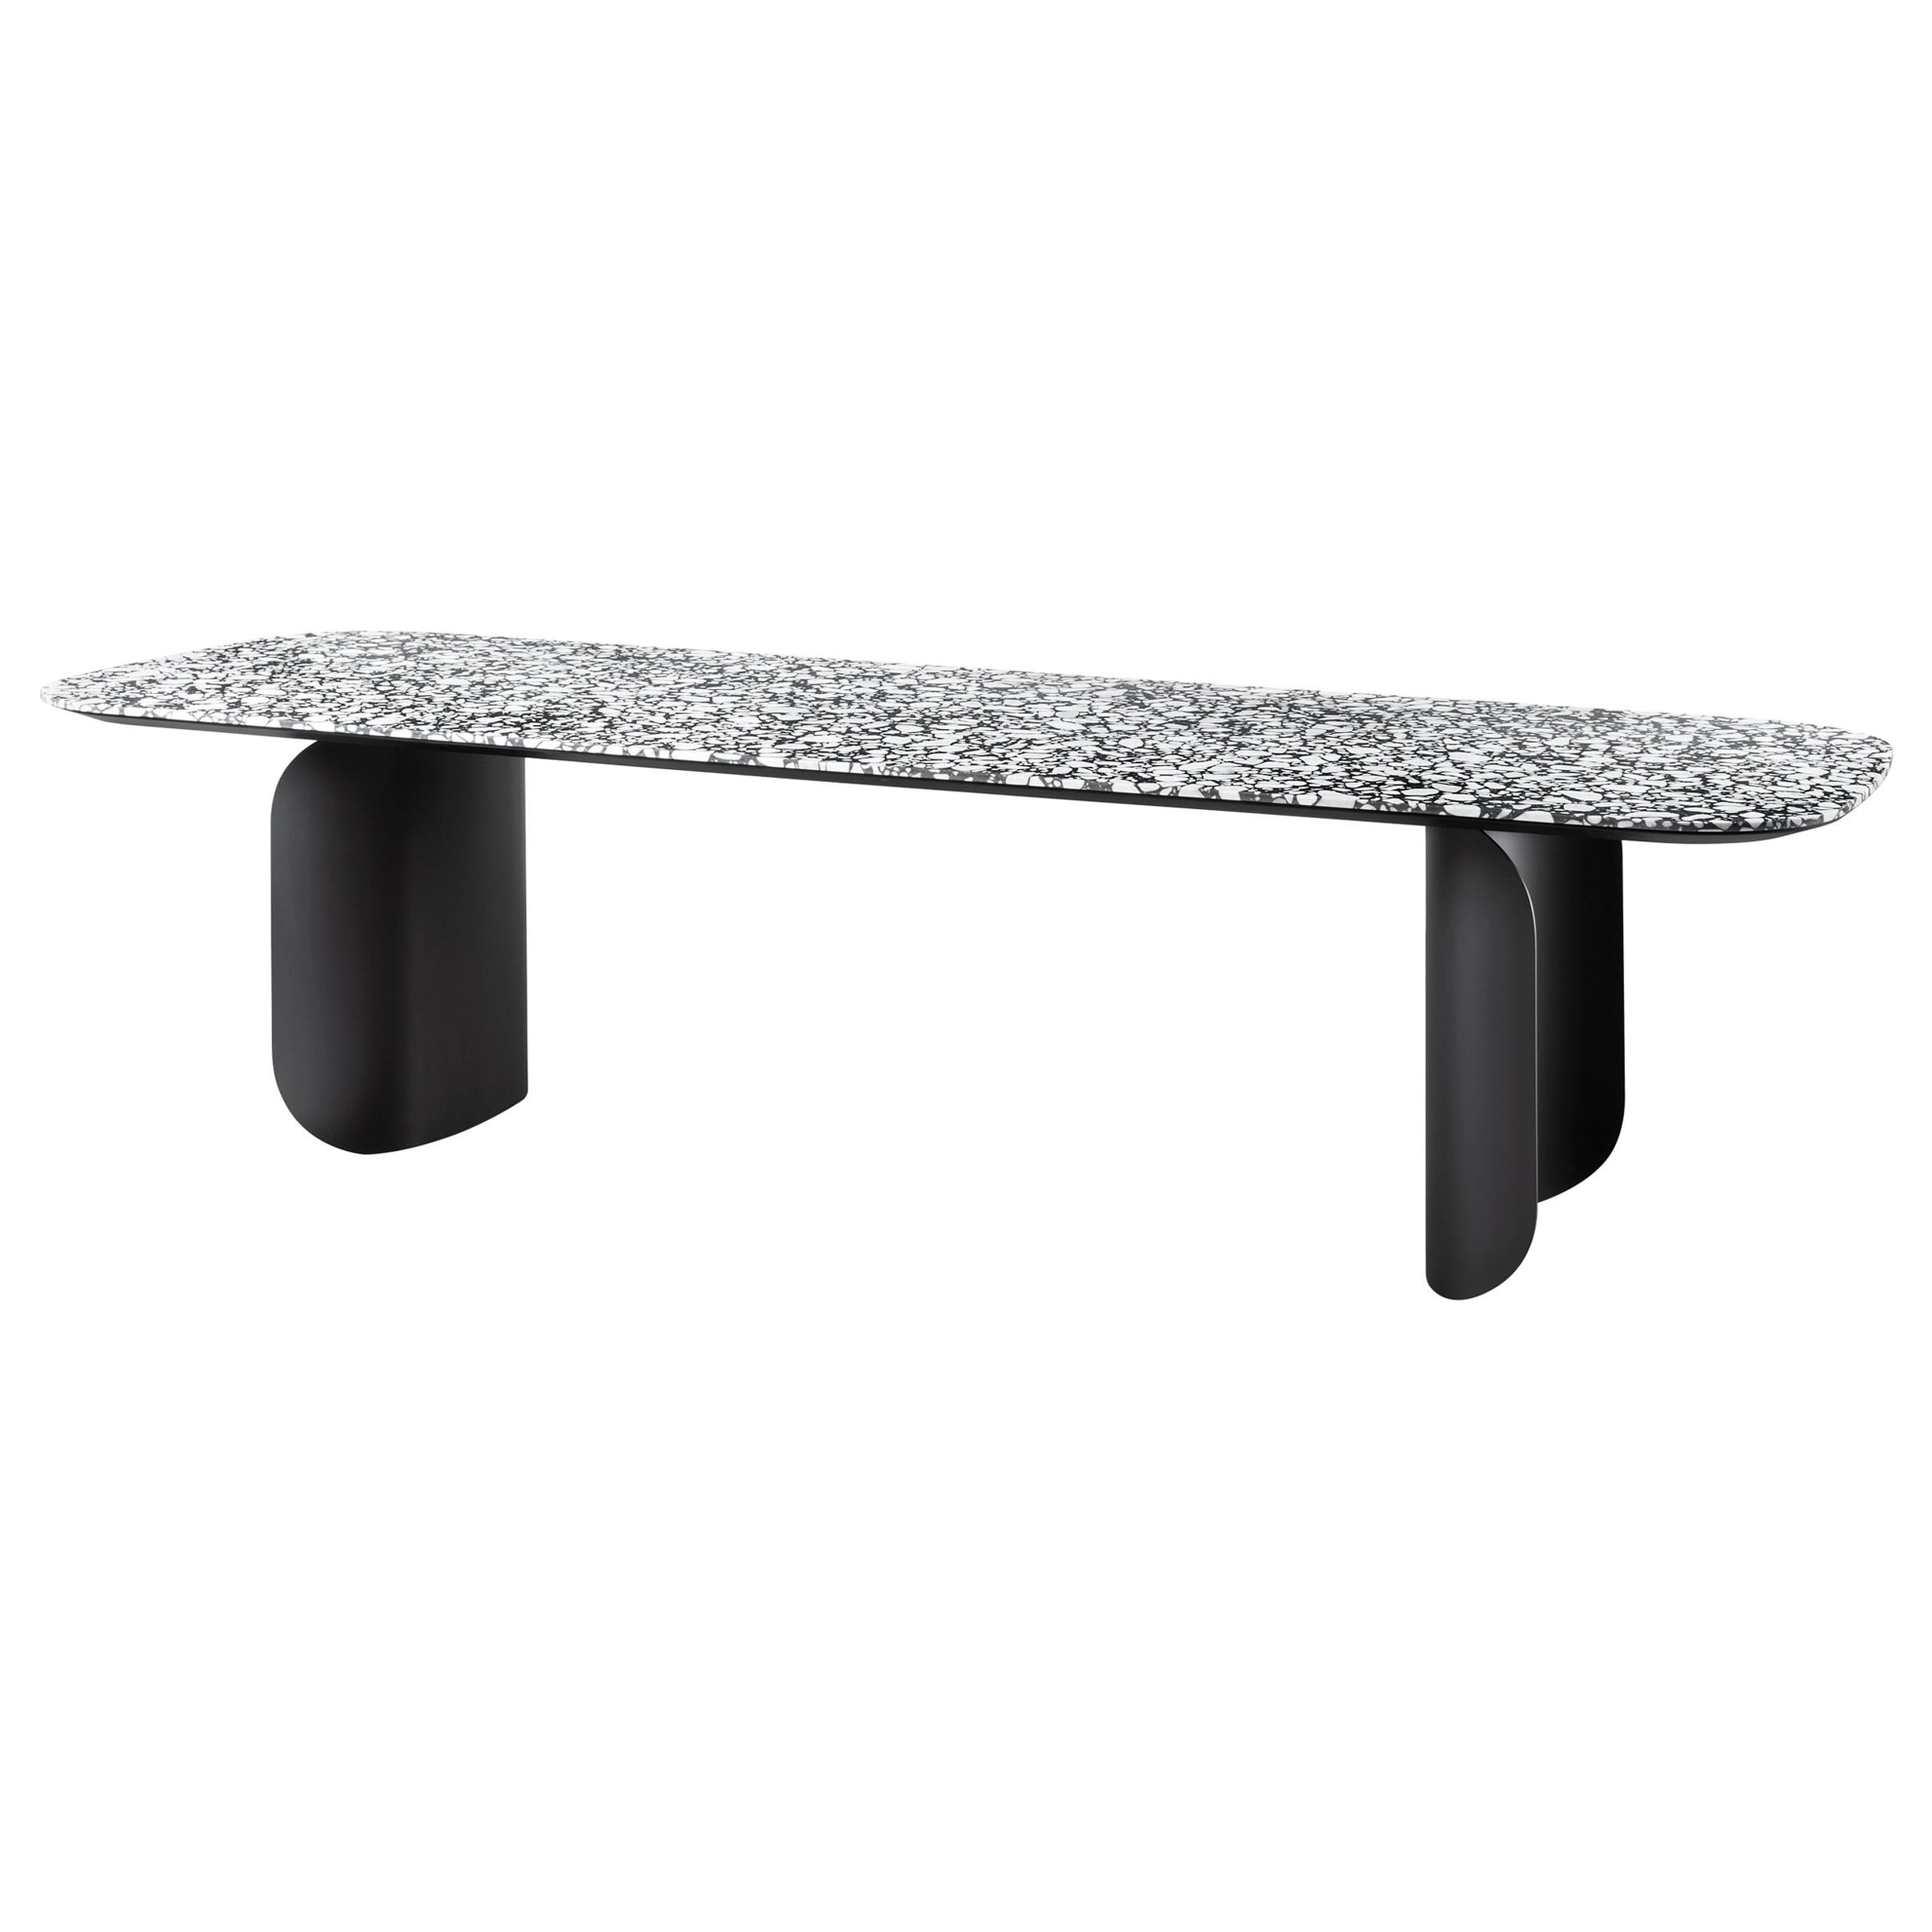 Barry Small Table in Palladio Moro Top with Black Lacquered Base by Alain Gilles